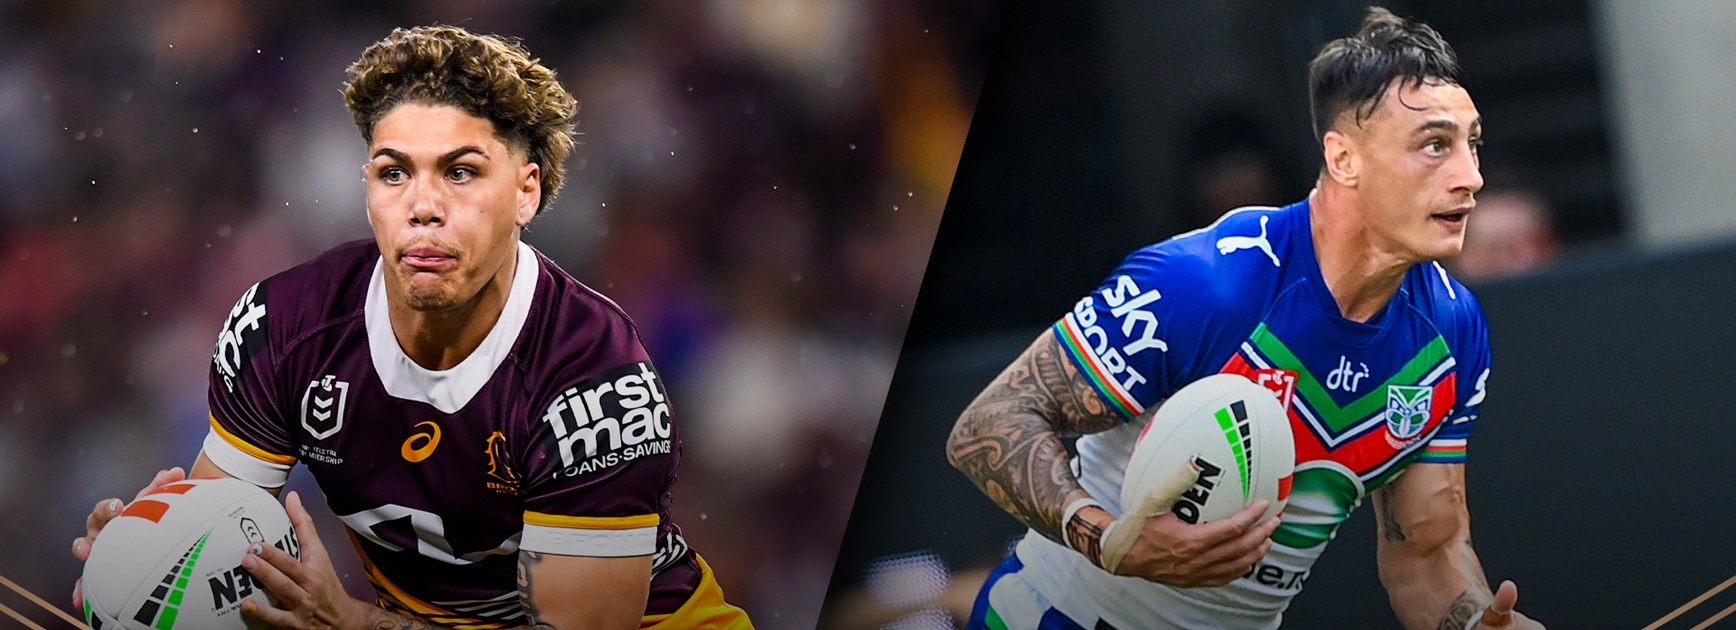 A win-win situation: The fullback transaction that ignited two clubs